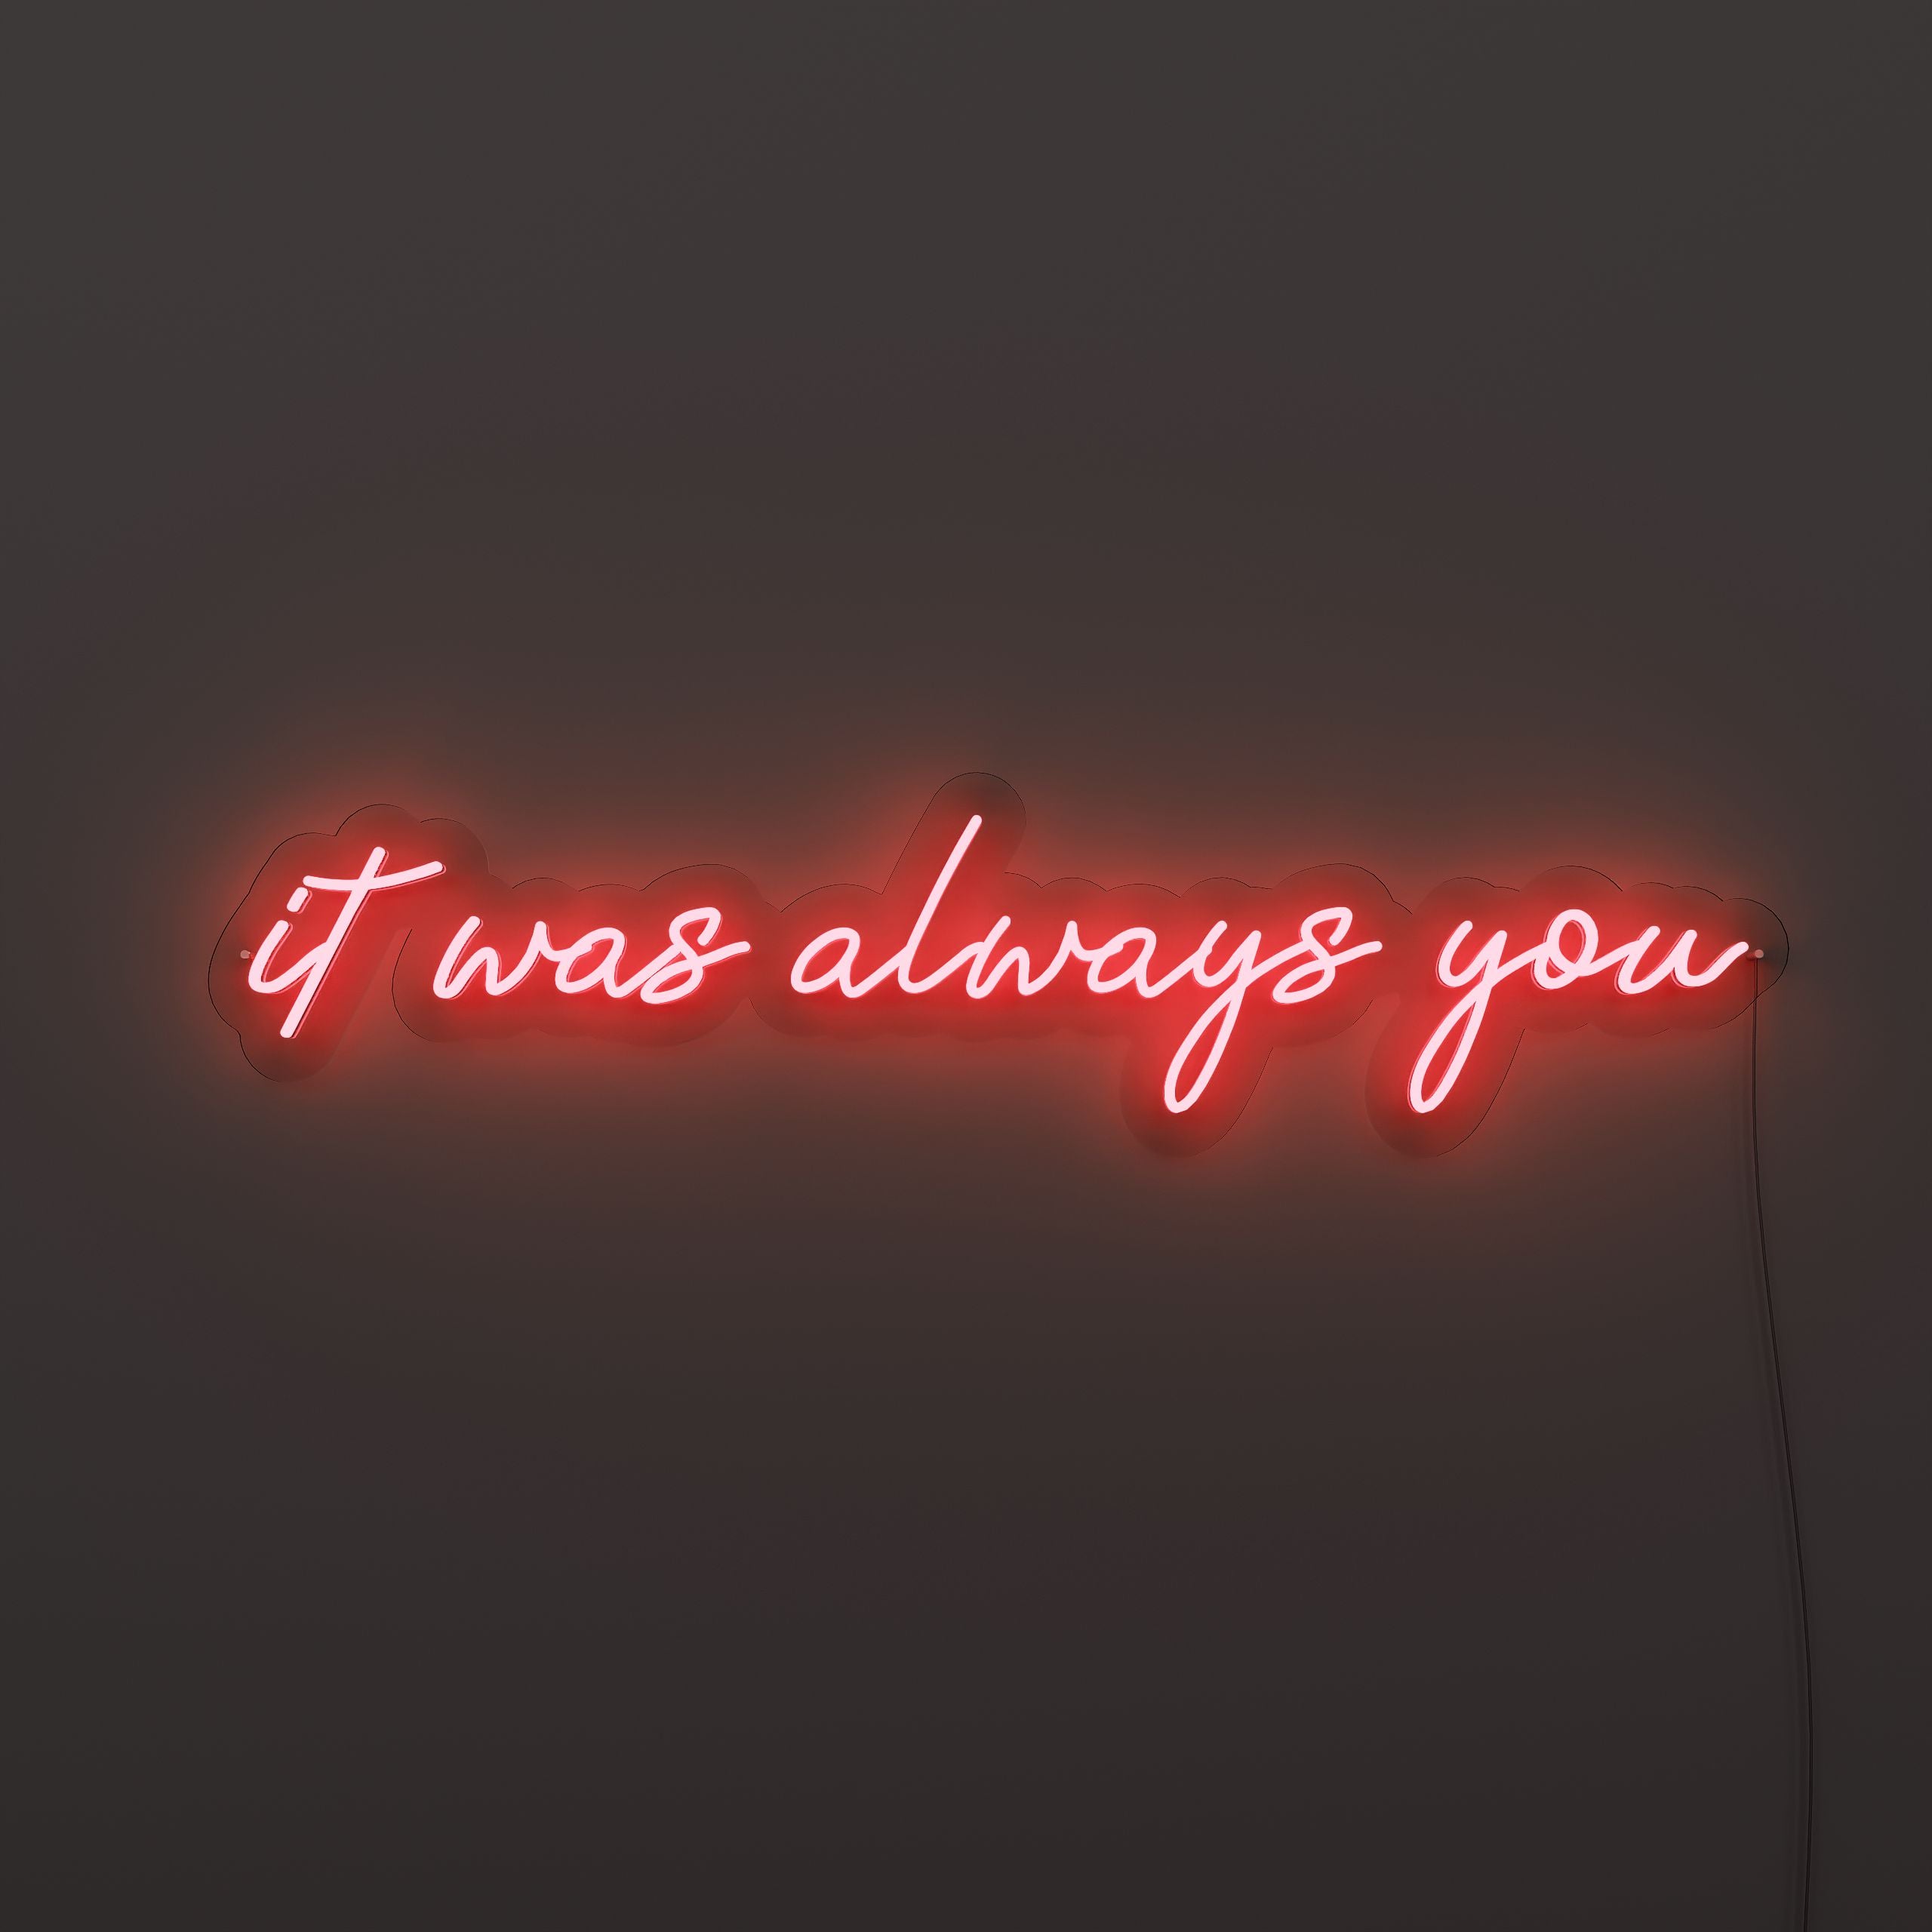 it-was-always-you-neon-sign-FireBrick-Neon-sign-Lite